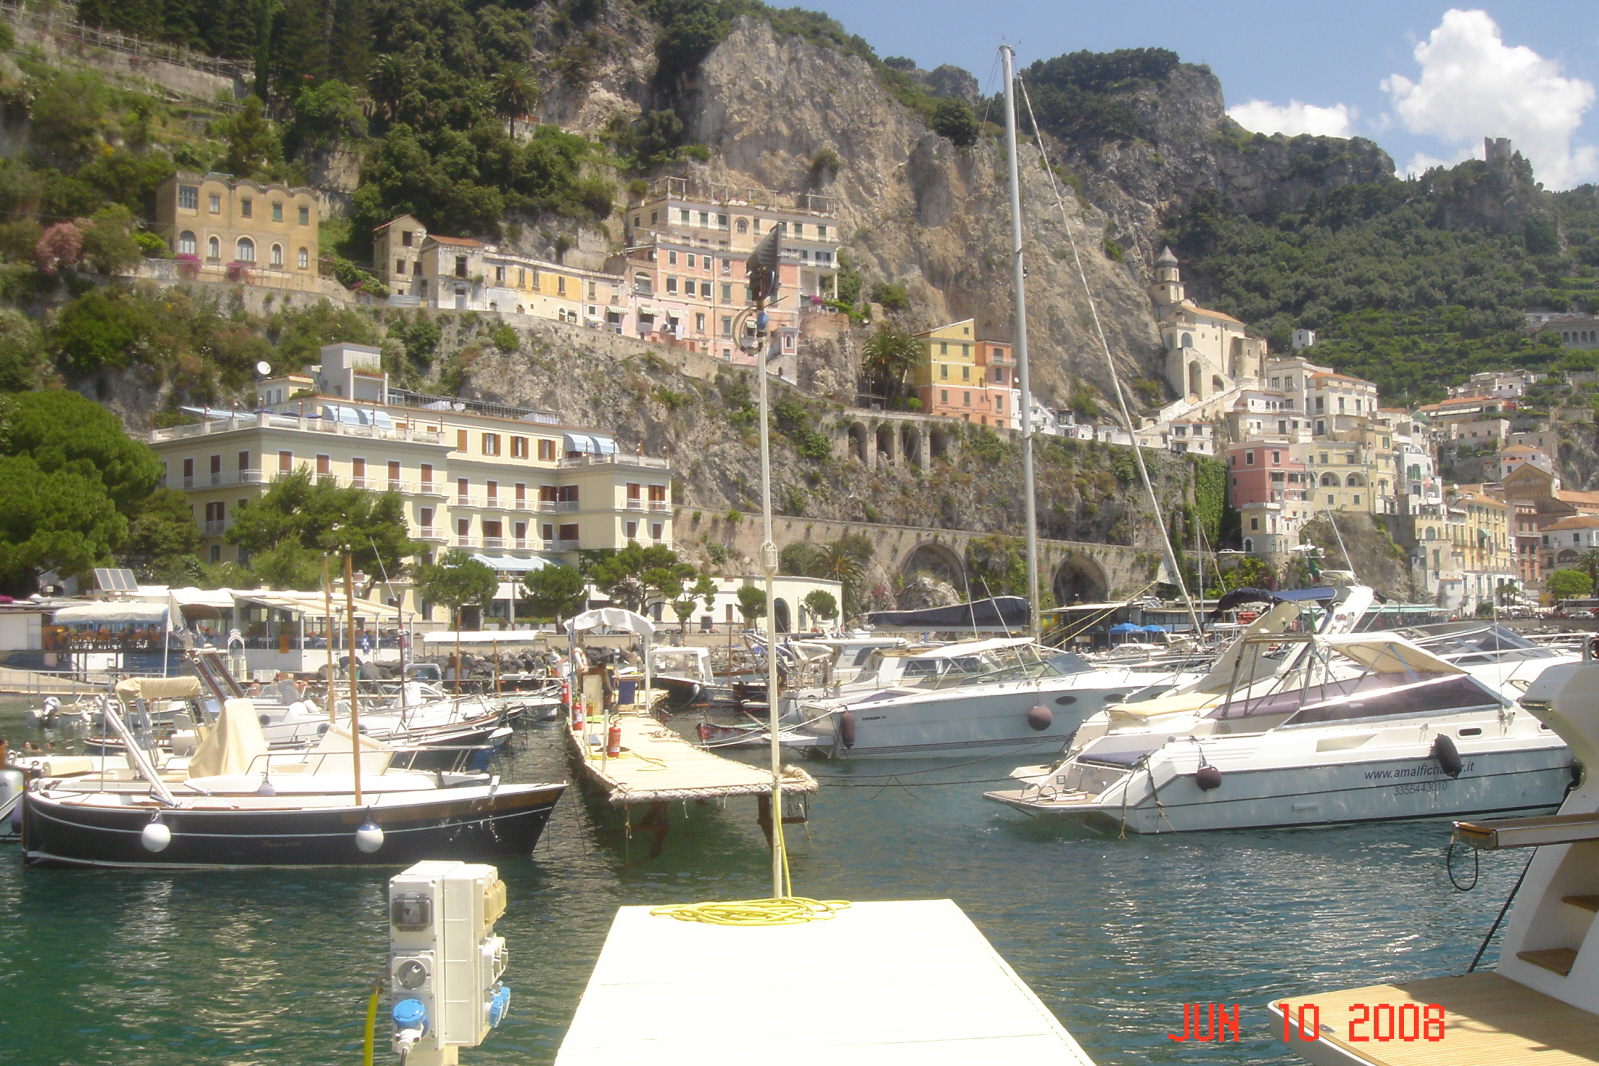 Amalfi from the water